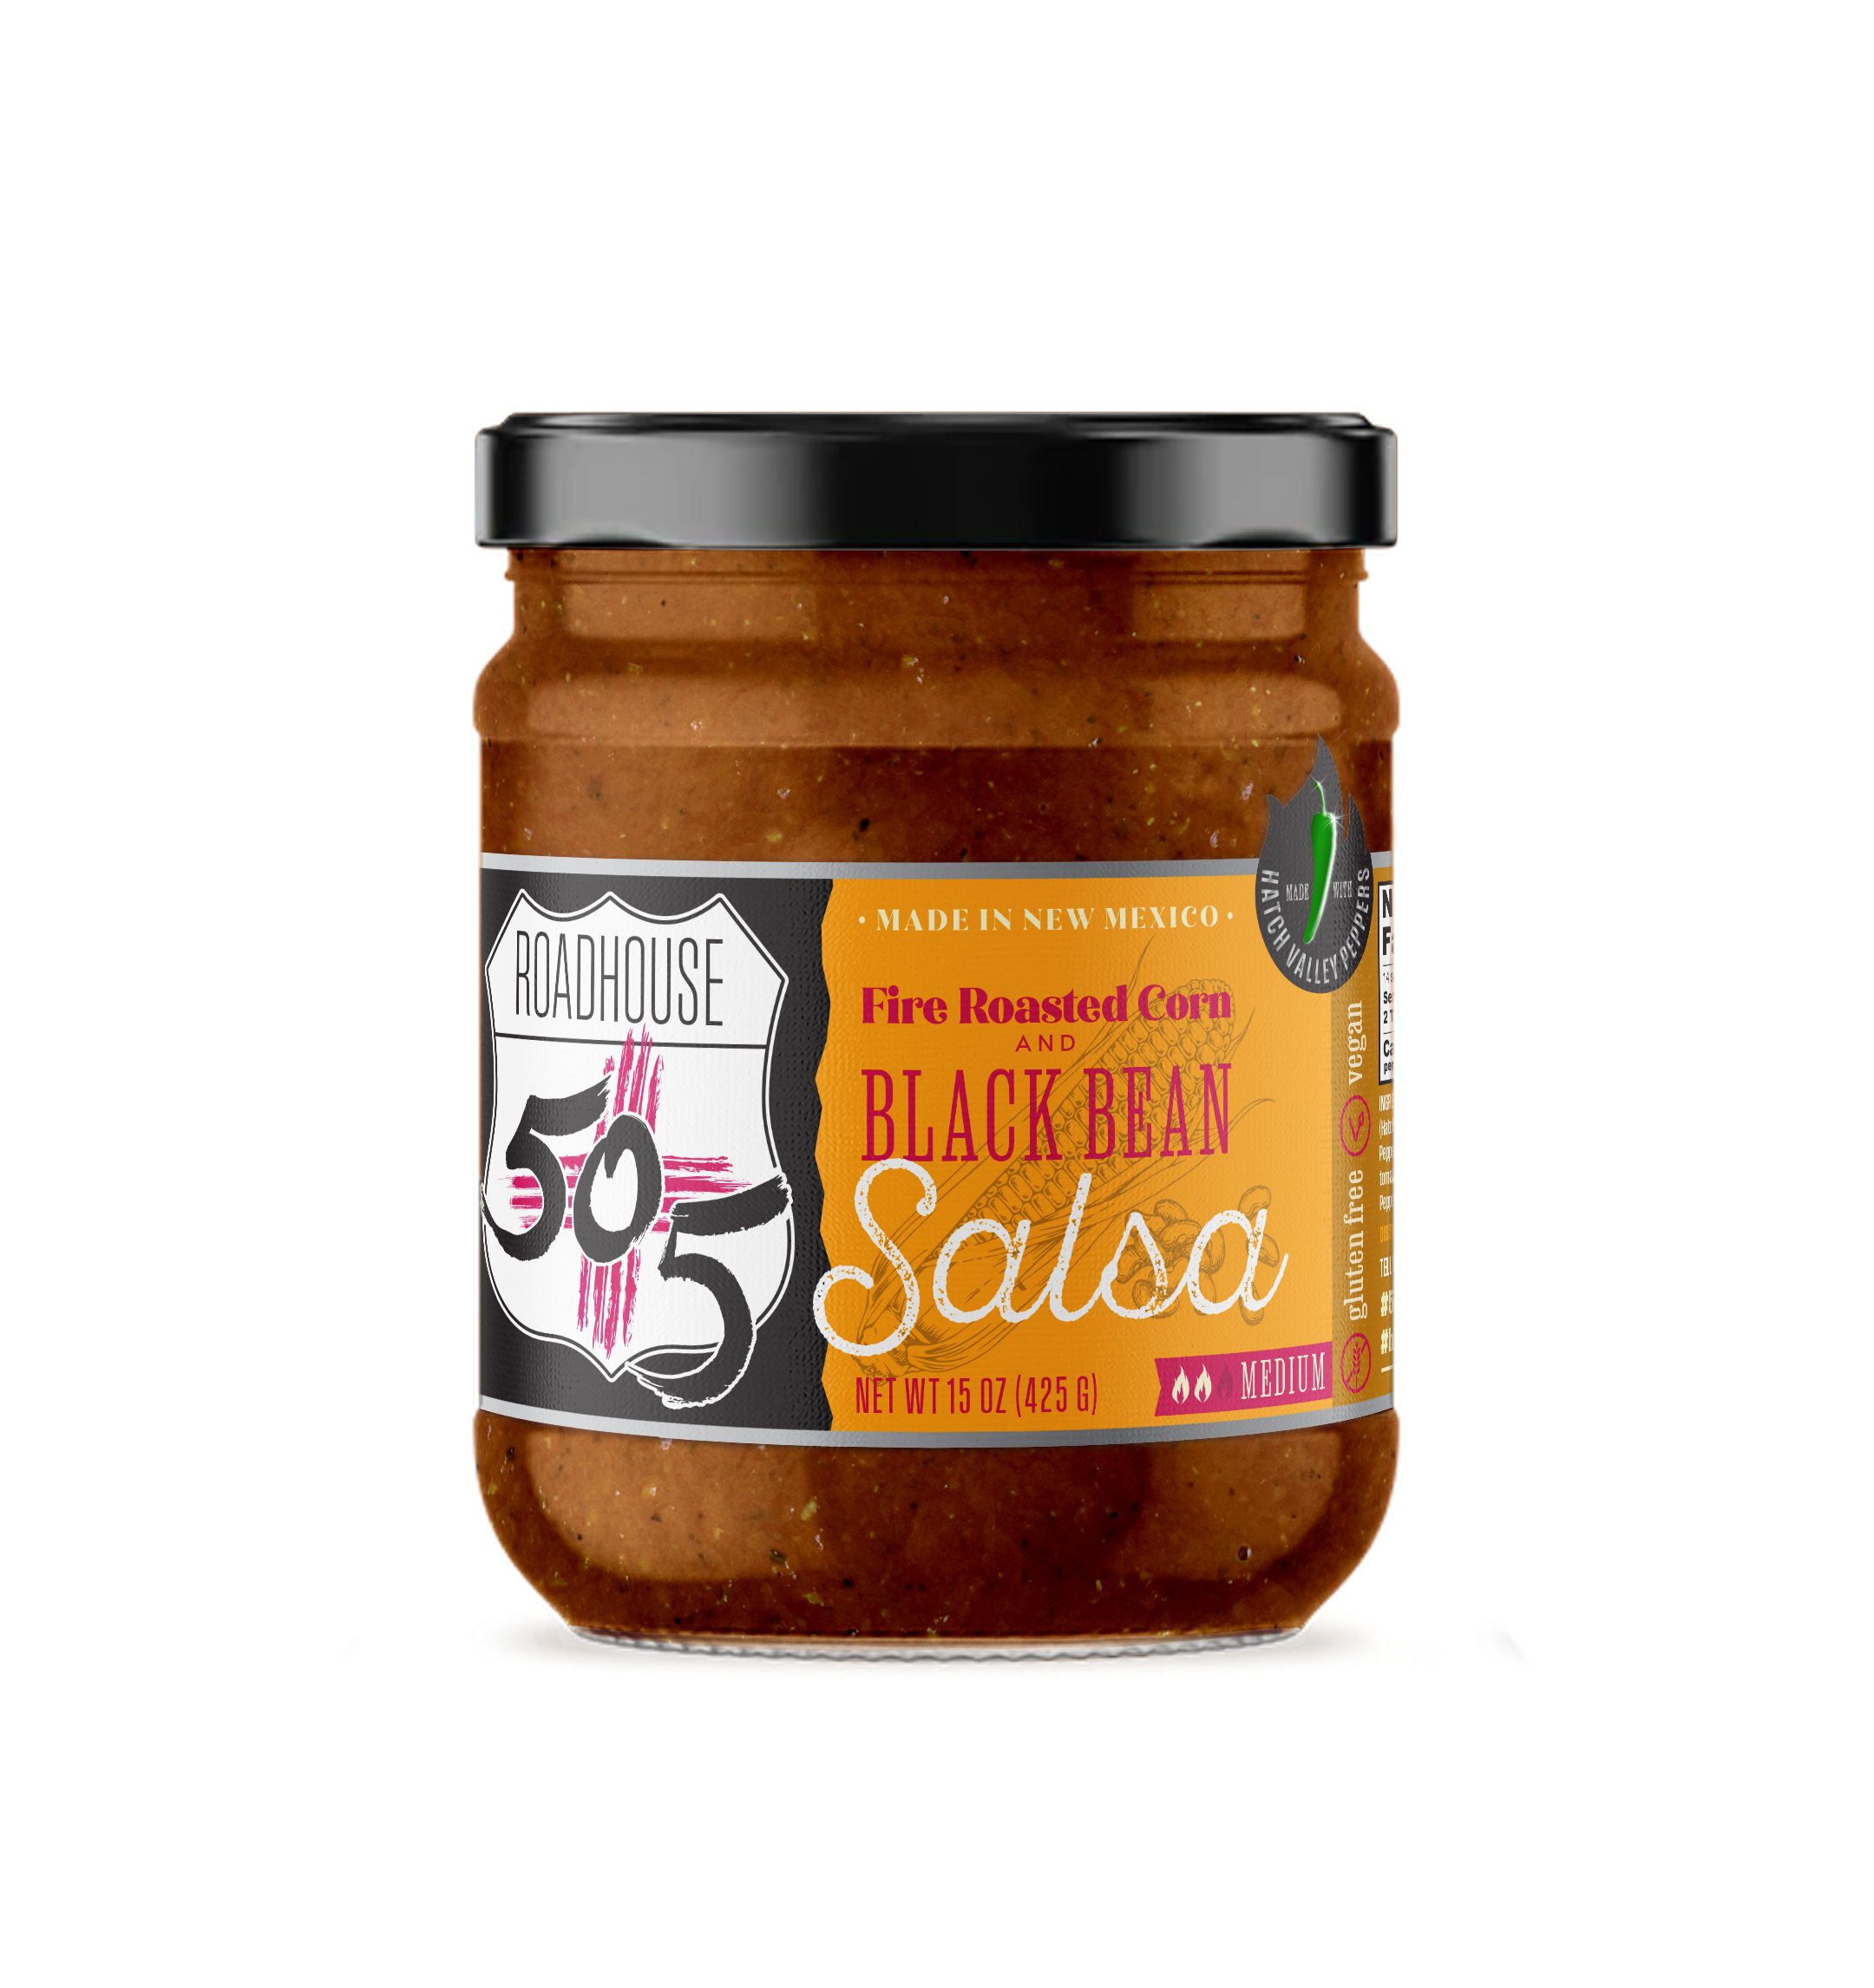 505 Southwestern Introduces New Line of Roadhouse Salsas 166